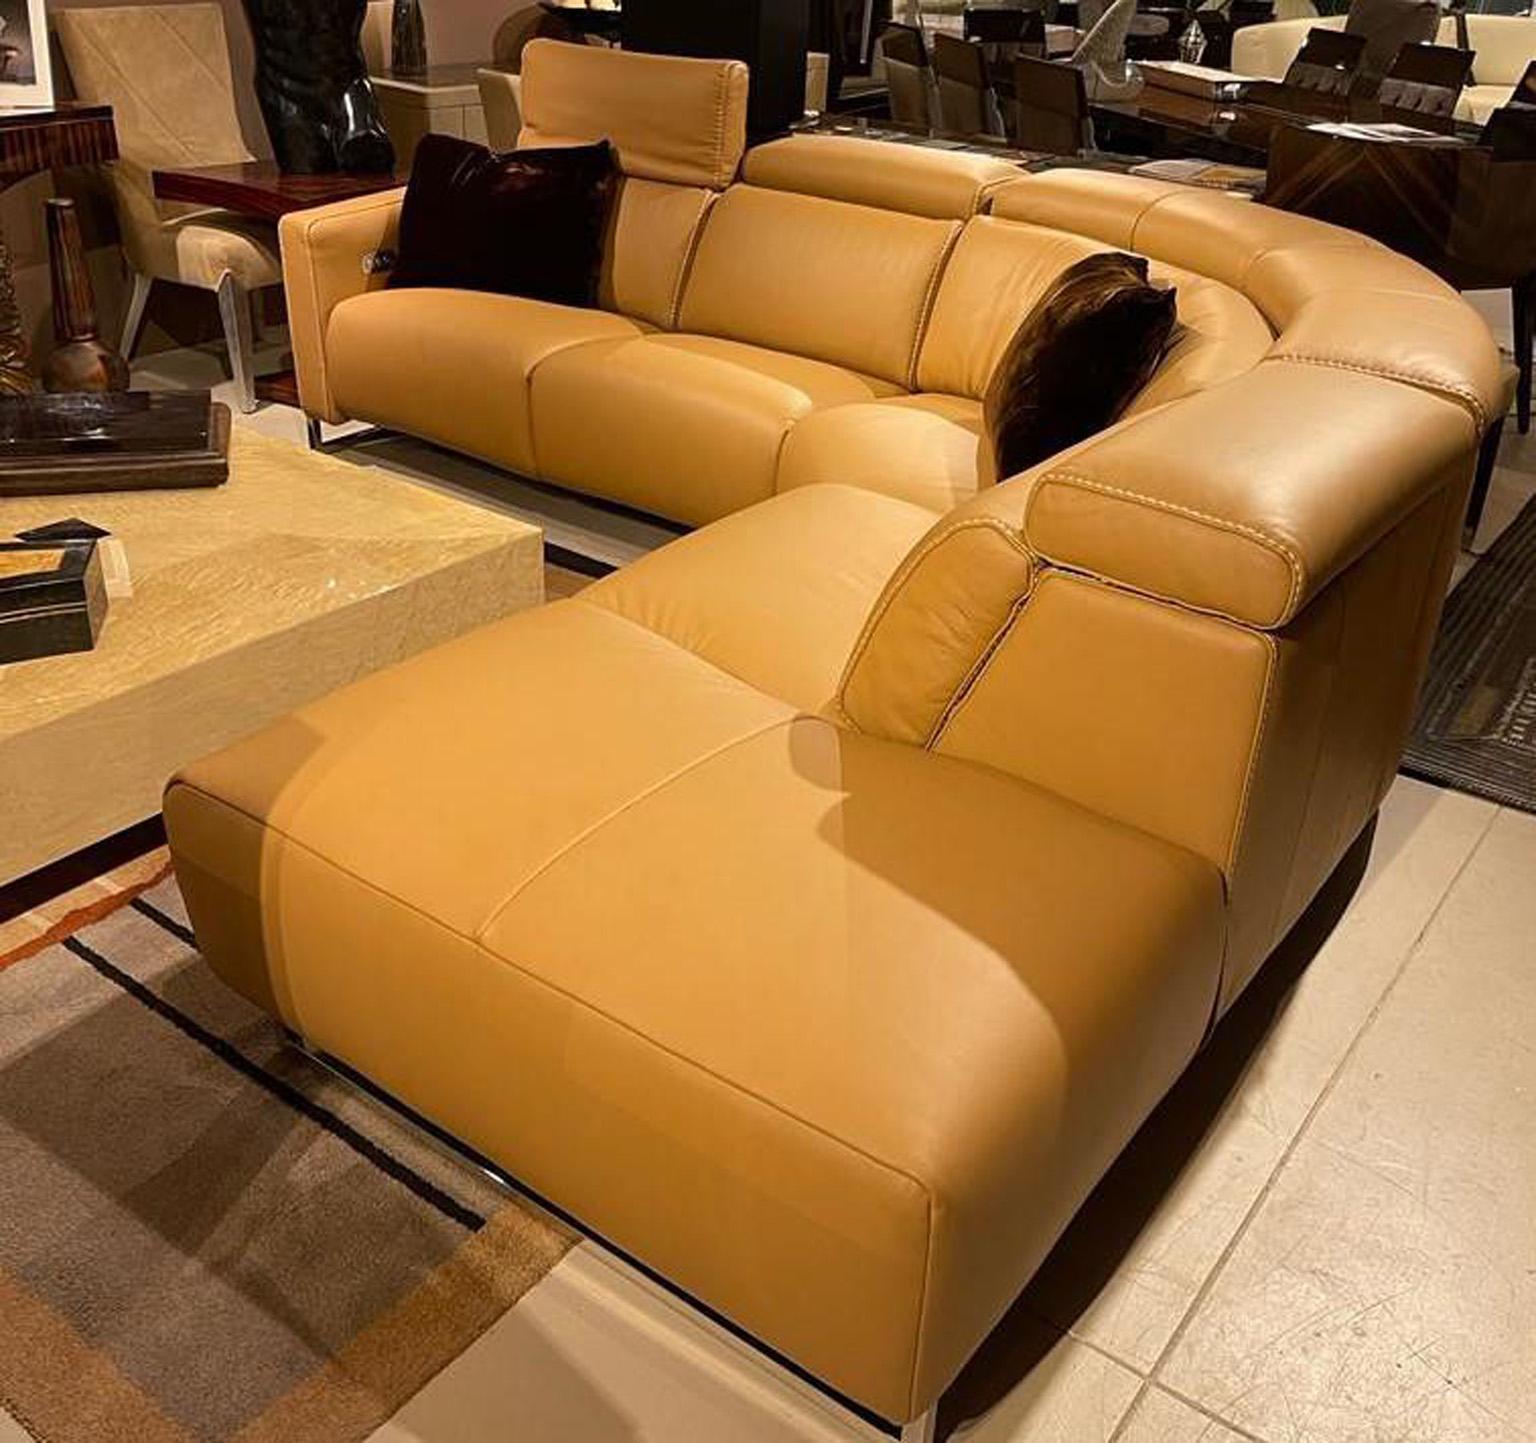 Fellini leather sectional sofa with 3 reclining seats with soft motion of the head, back and leg rest.
1x Arm seat with motion (electric)
1x Armless seat with motion (electric)
Center curve corner. 
1x Armless seat with motion (electric)
1x